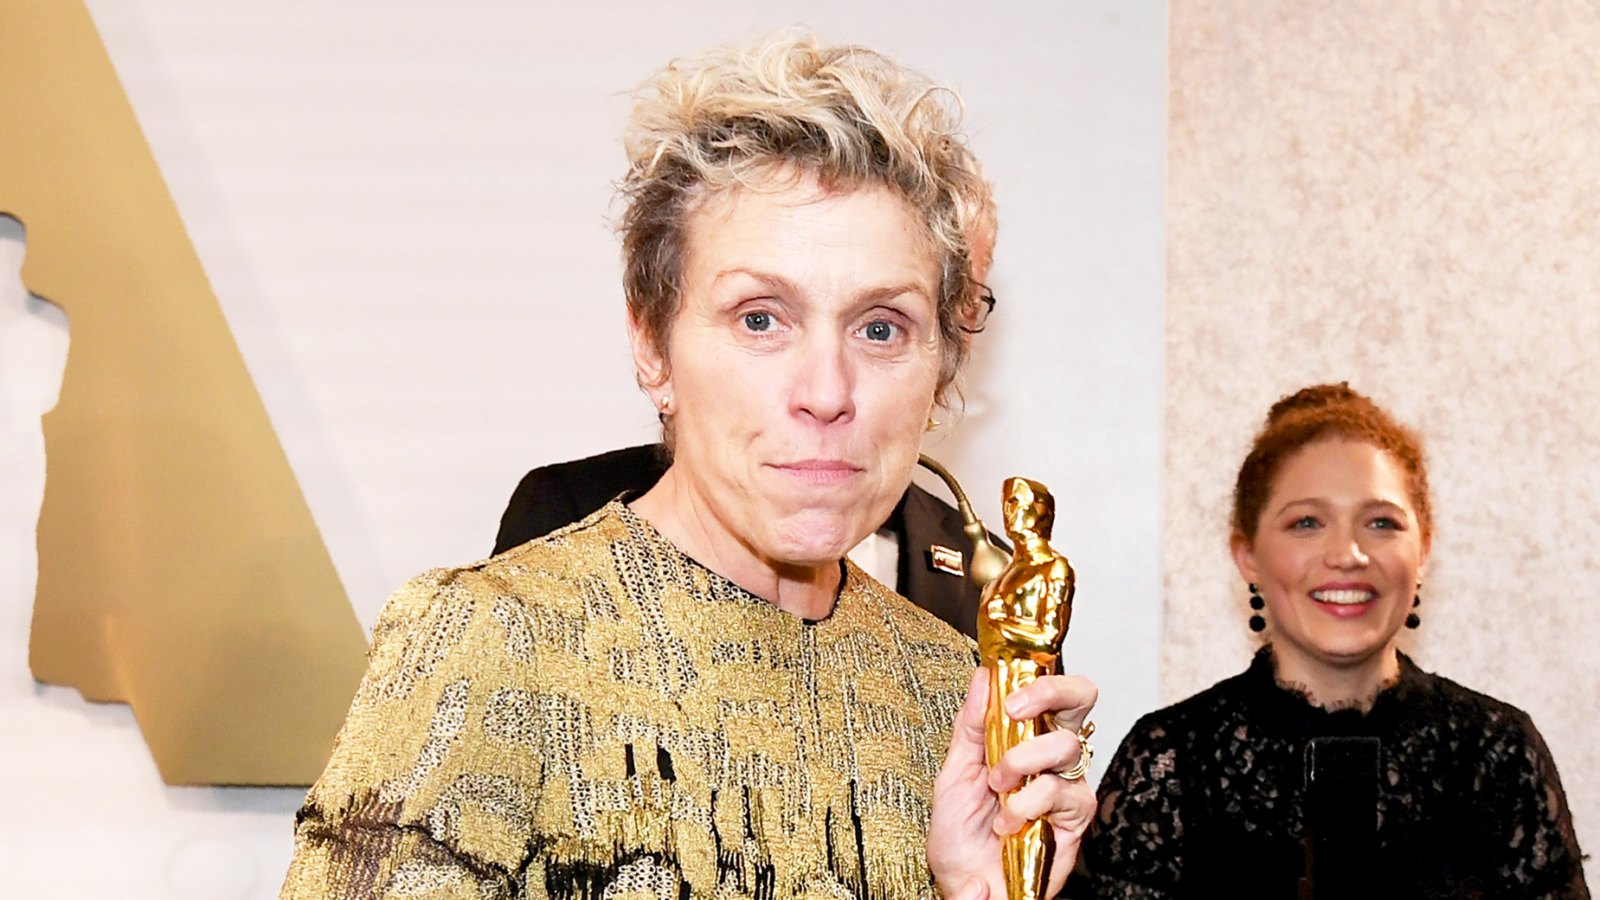 Frances McDormand attends the 90th Annual Academy Awards Governors Ball at the Hollywood & Highland Center on March 4, 2018, in Hollywood, California.